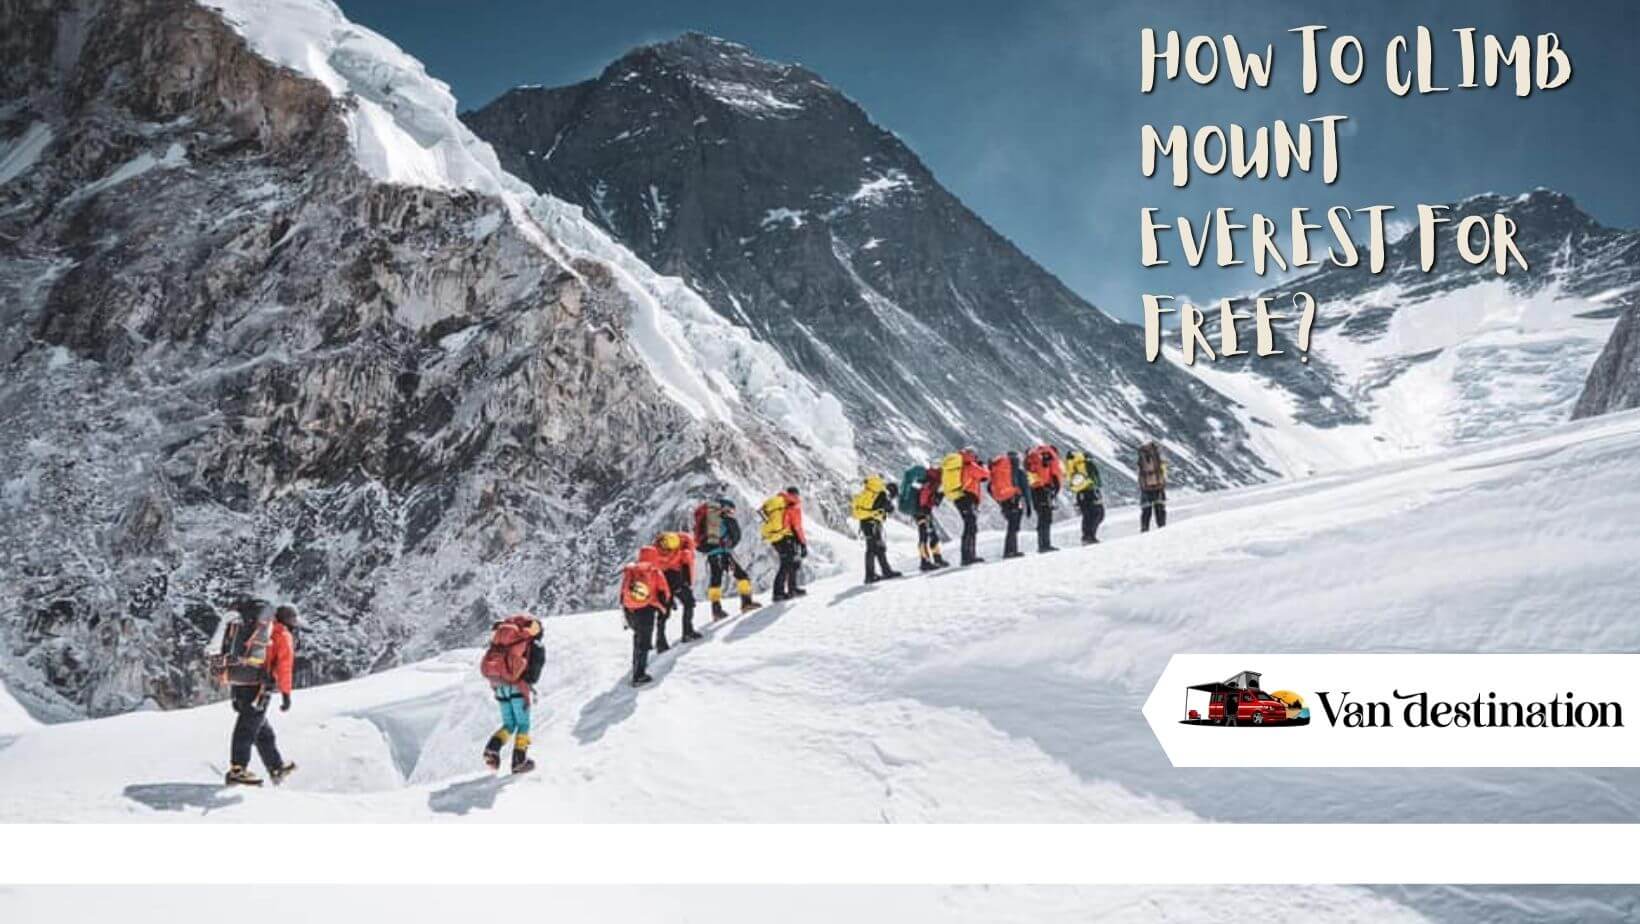 How To Climb Mount Everest For Free